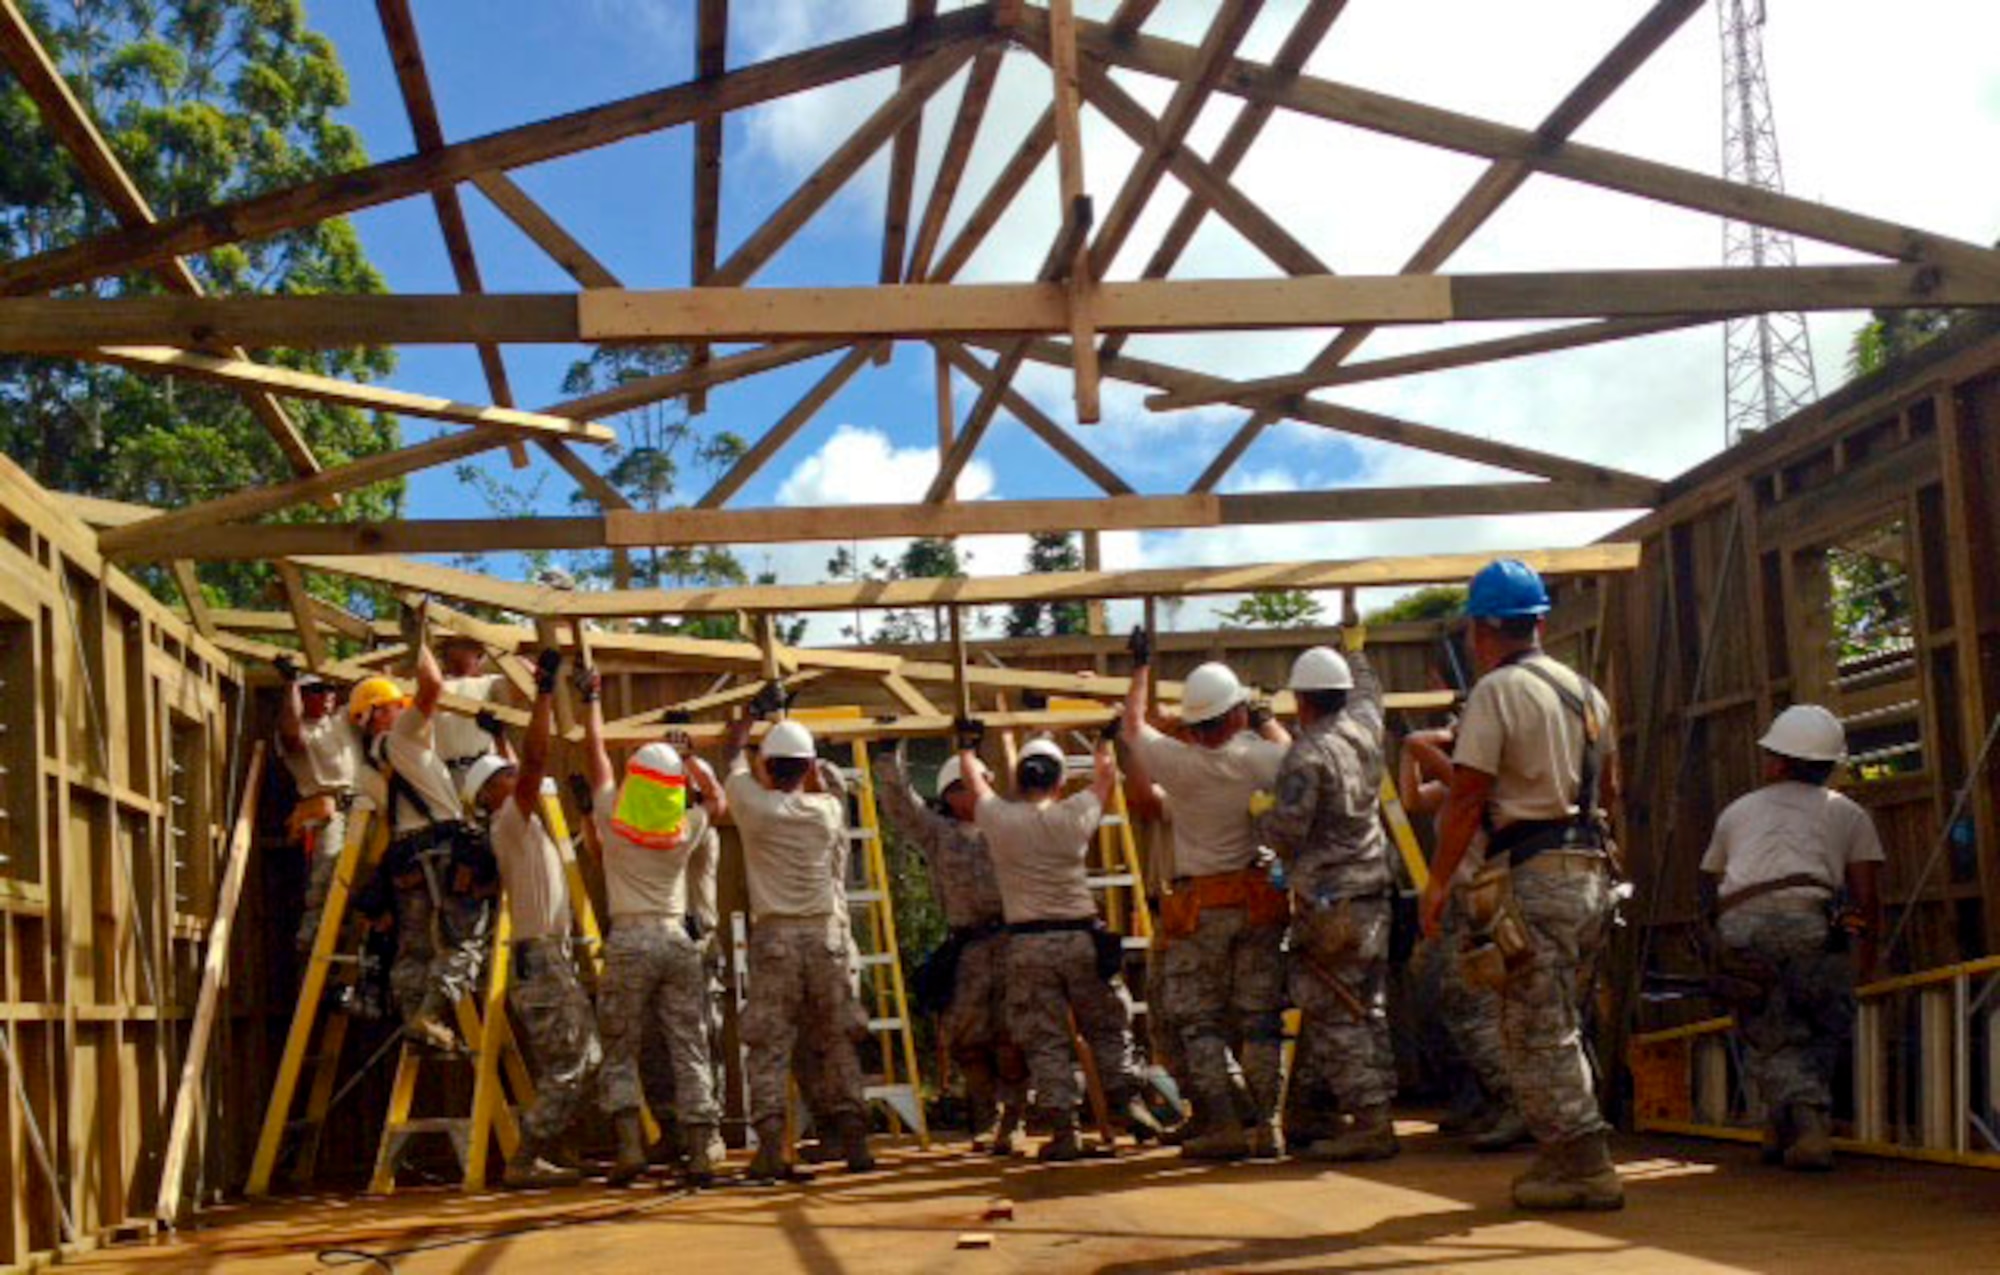 Members of the Hawaii Air National Guard 154th Civil Engineer Squadron have been working on the construction of two new dormitories to be used for female students at Togoba Secondary School in Mount Hagen, Papua New Guinea, as part of Pacific Unity 14-8. PACUNITY helps cultivate common bonds and fosters goodwill between the U.S. and regional nations through multi-lateral humanitarian assistance and civil military operations.  (U.S. Air Force photo by Airman 1st Class Jaimie Aquino/Released)                               